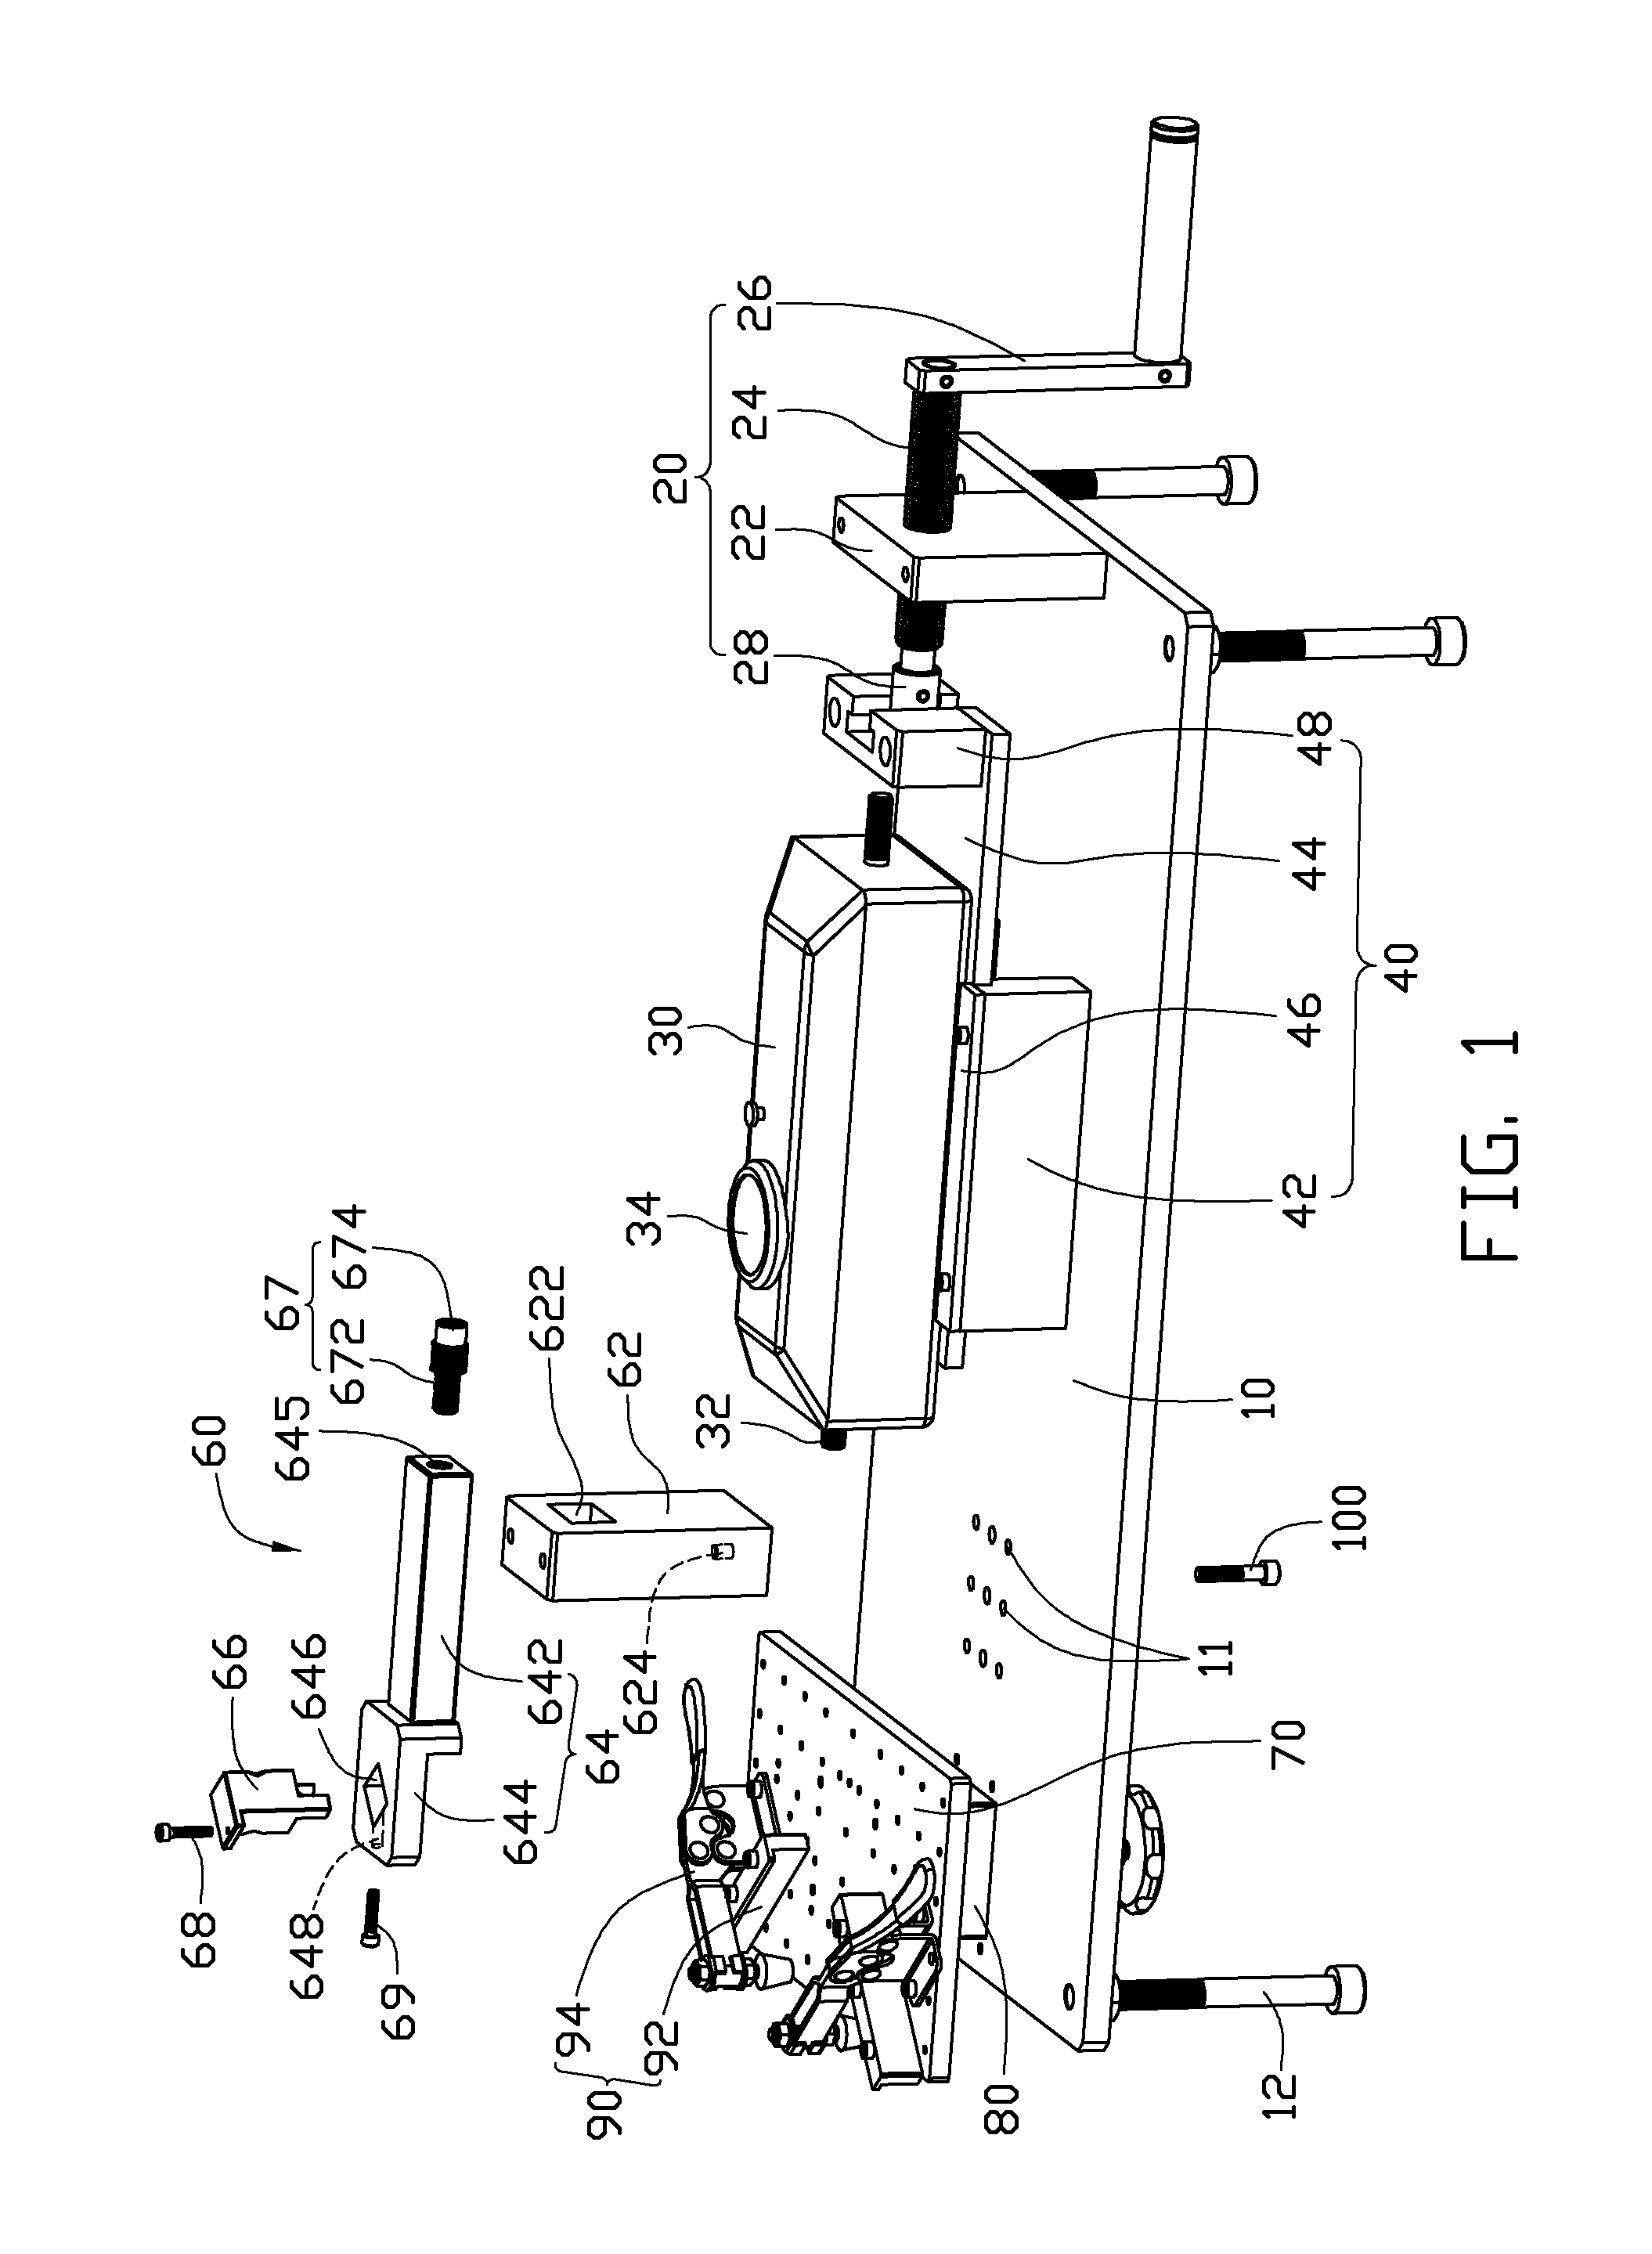 Apparatus for testing object strength